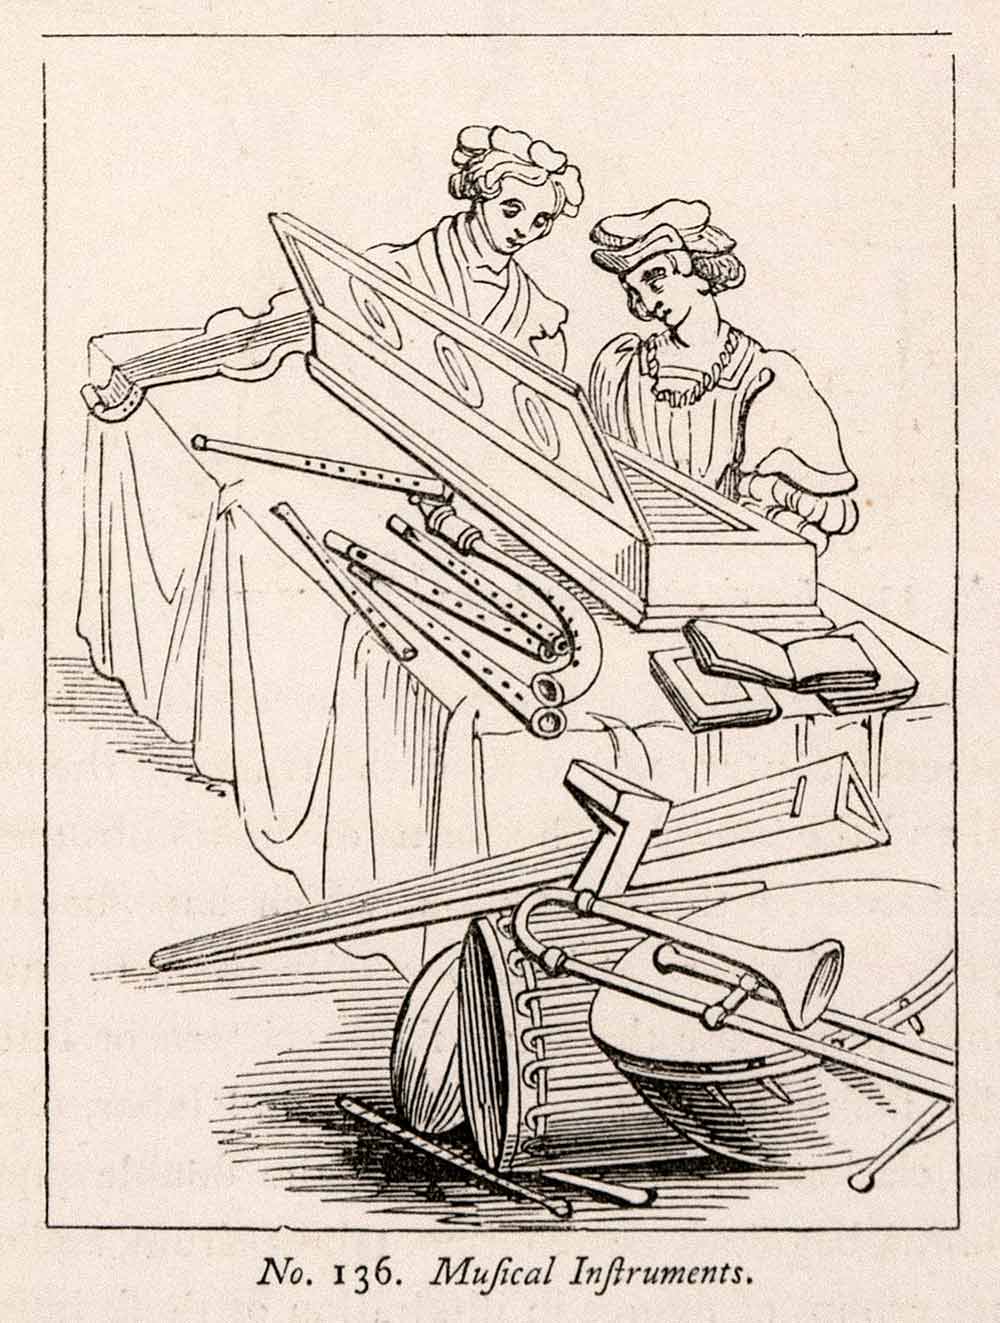 1862 Wood Engraving Frederick William Fairholt Musical Instruments XGBA4